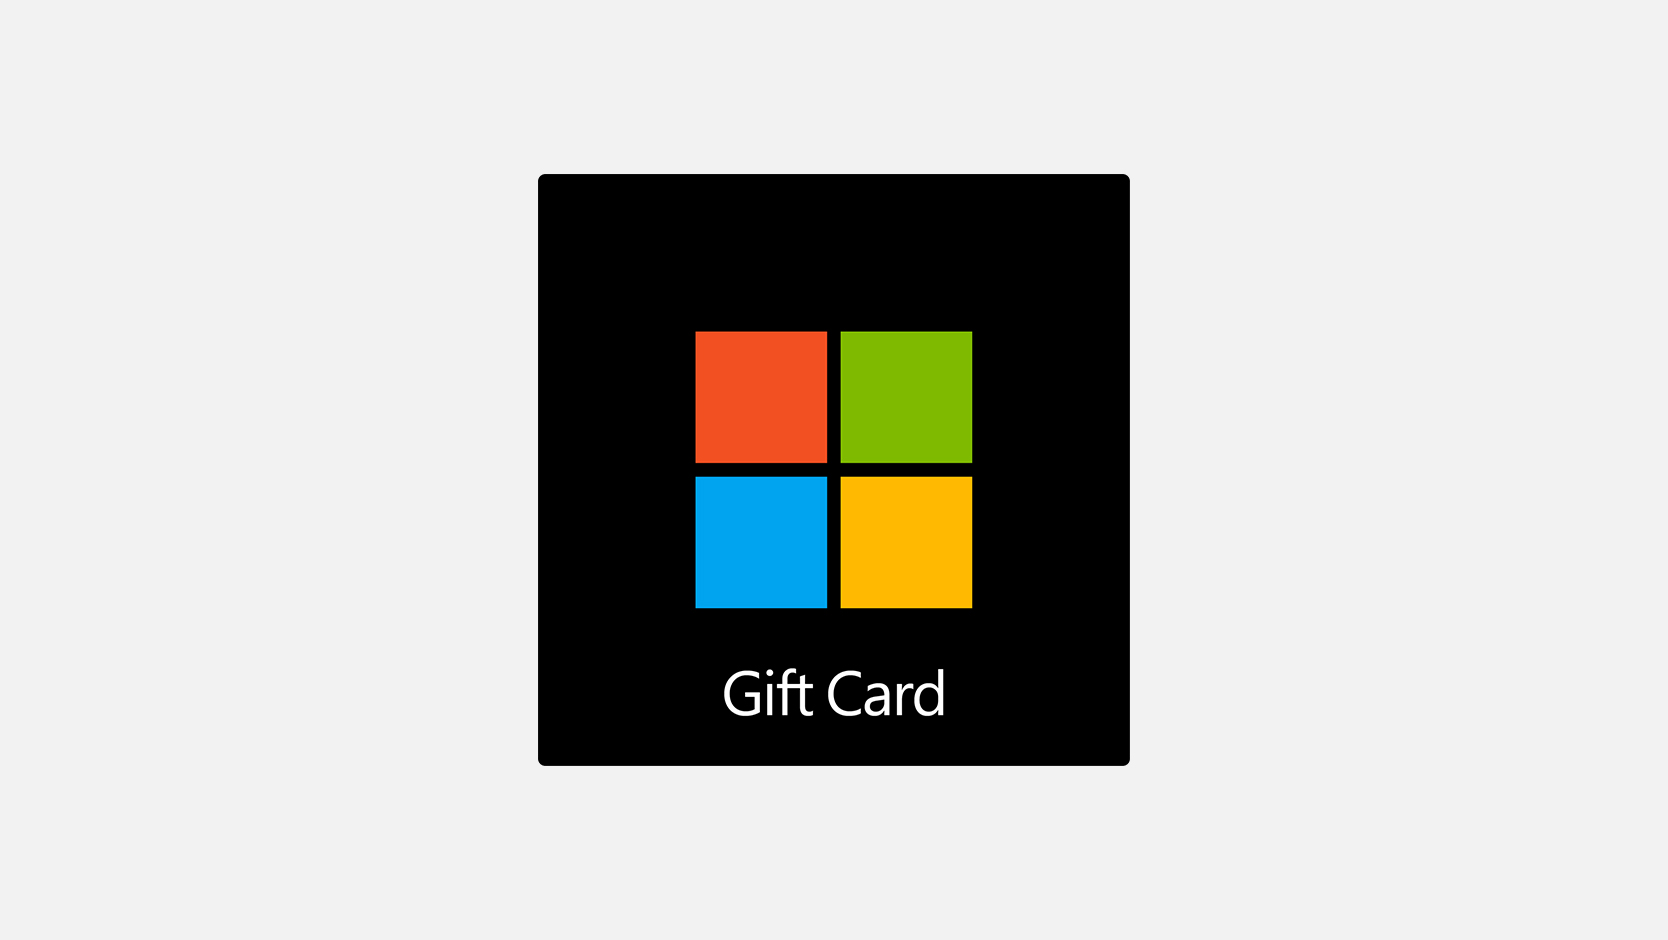 can you use microsoft gift cards on xbox